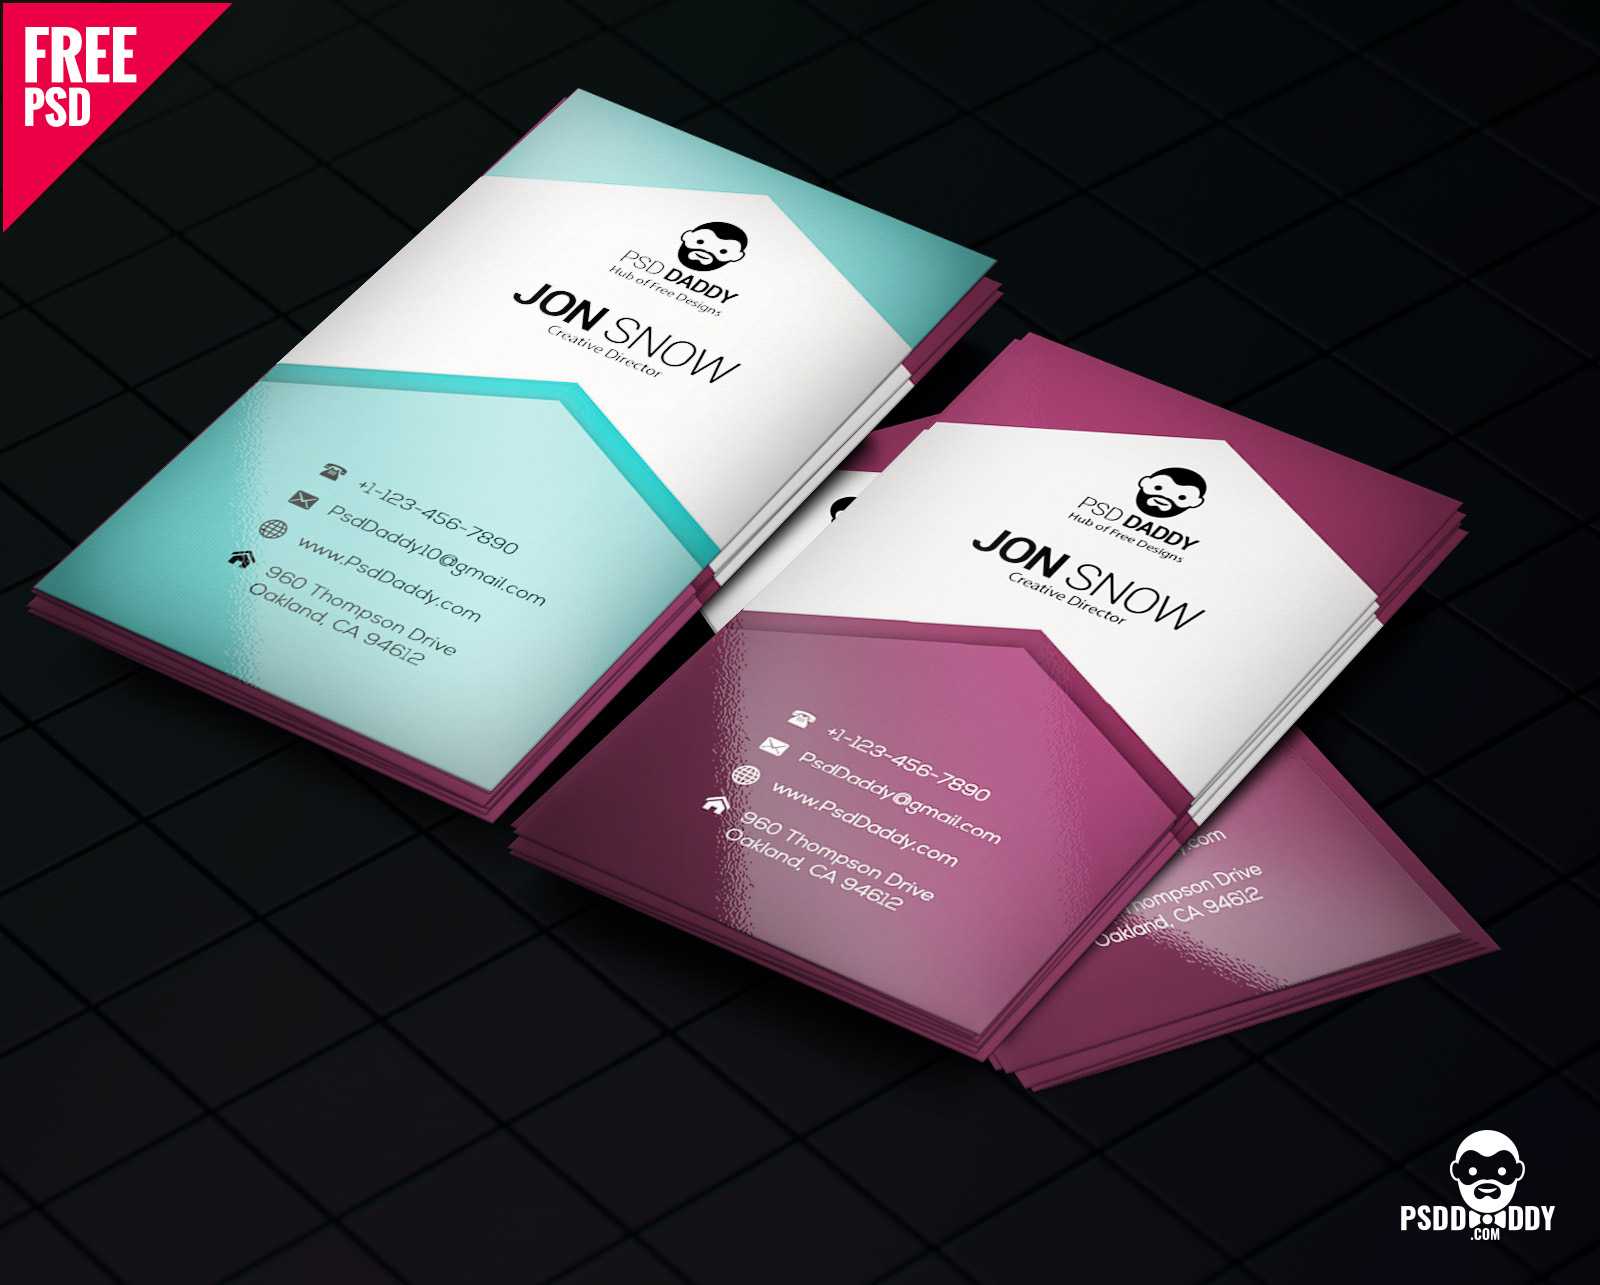 Download]Creative Business Card Psd Free | Psddaddy Intended For Business Card Maker Template